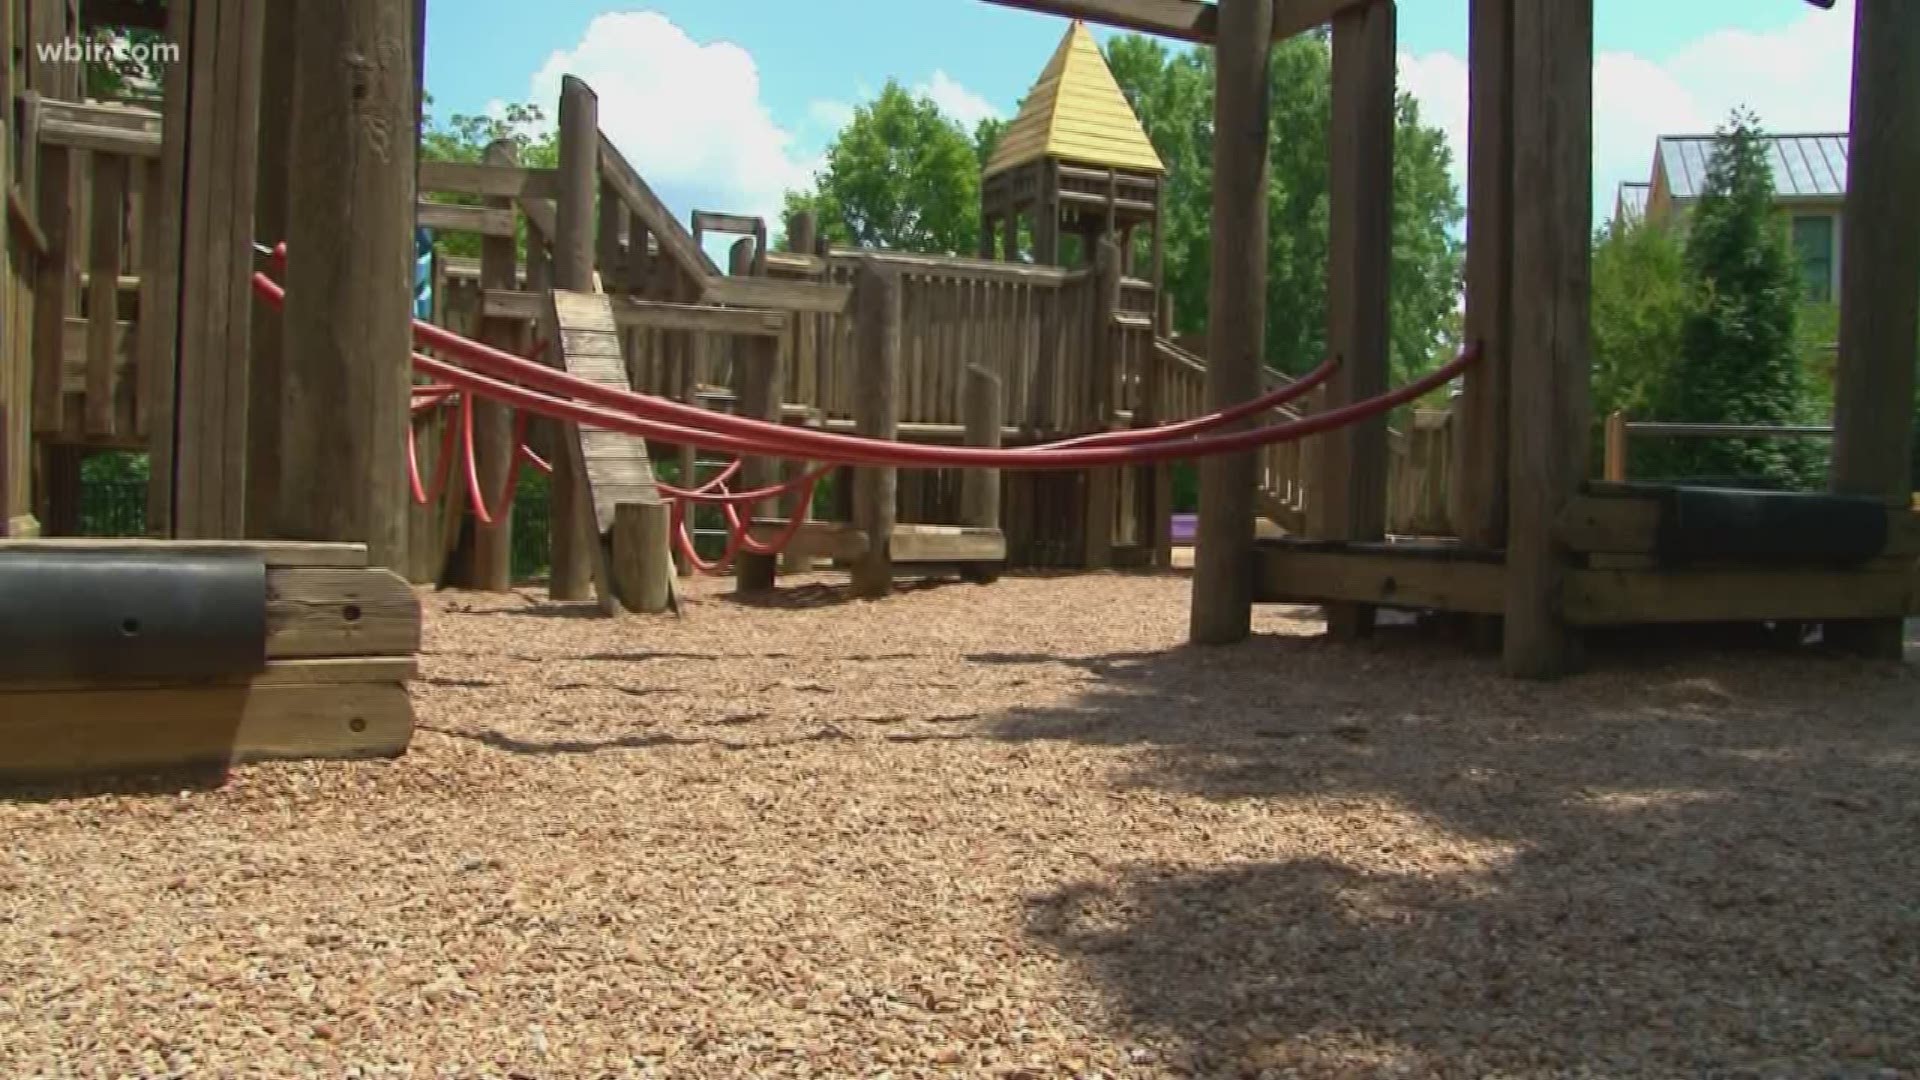 The Fort Kid playground is now set to be demolished in April.